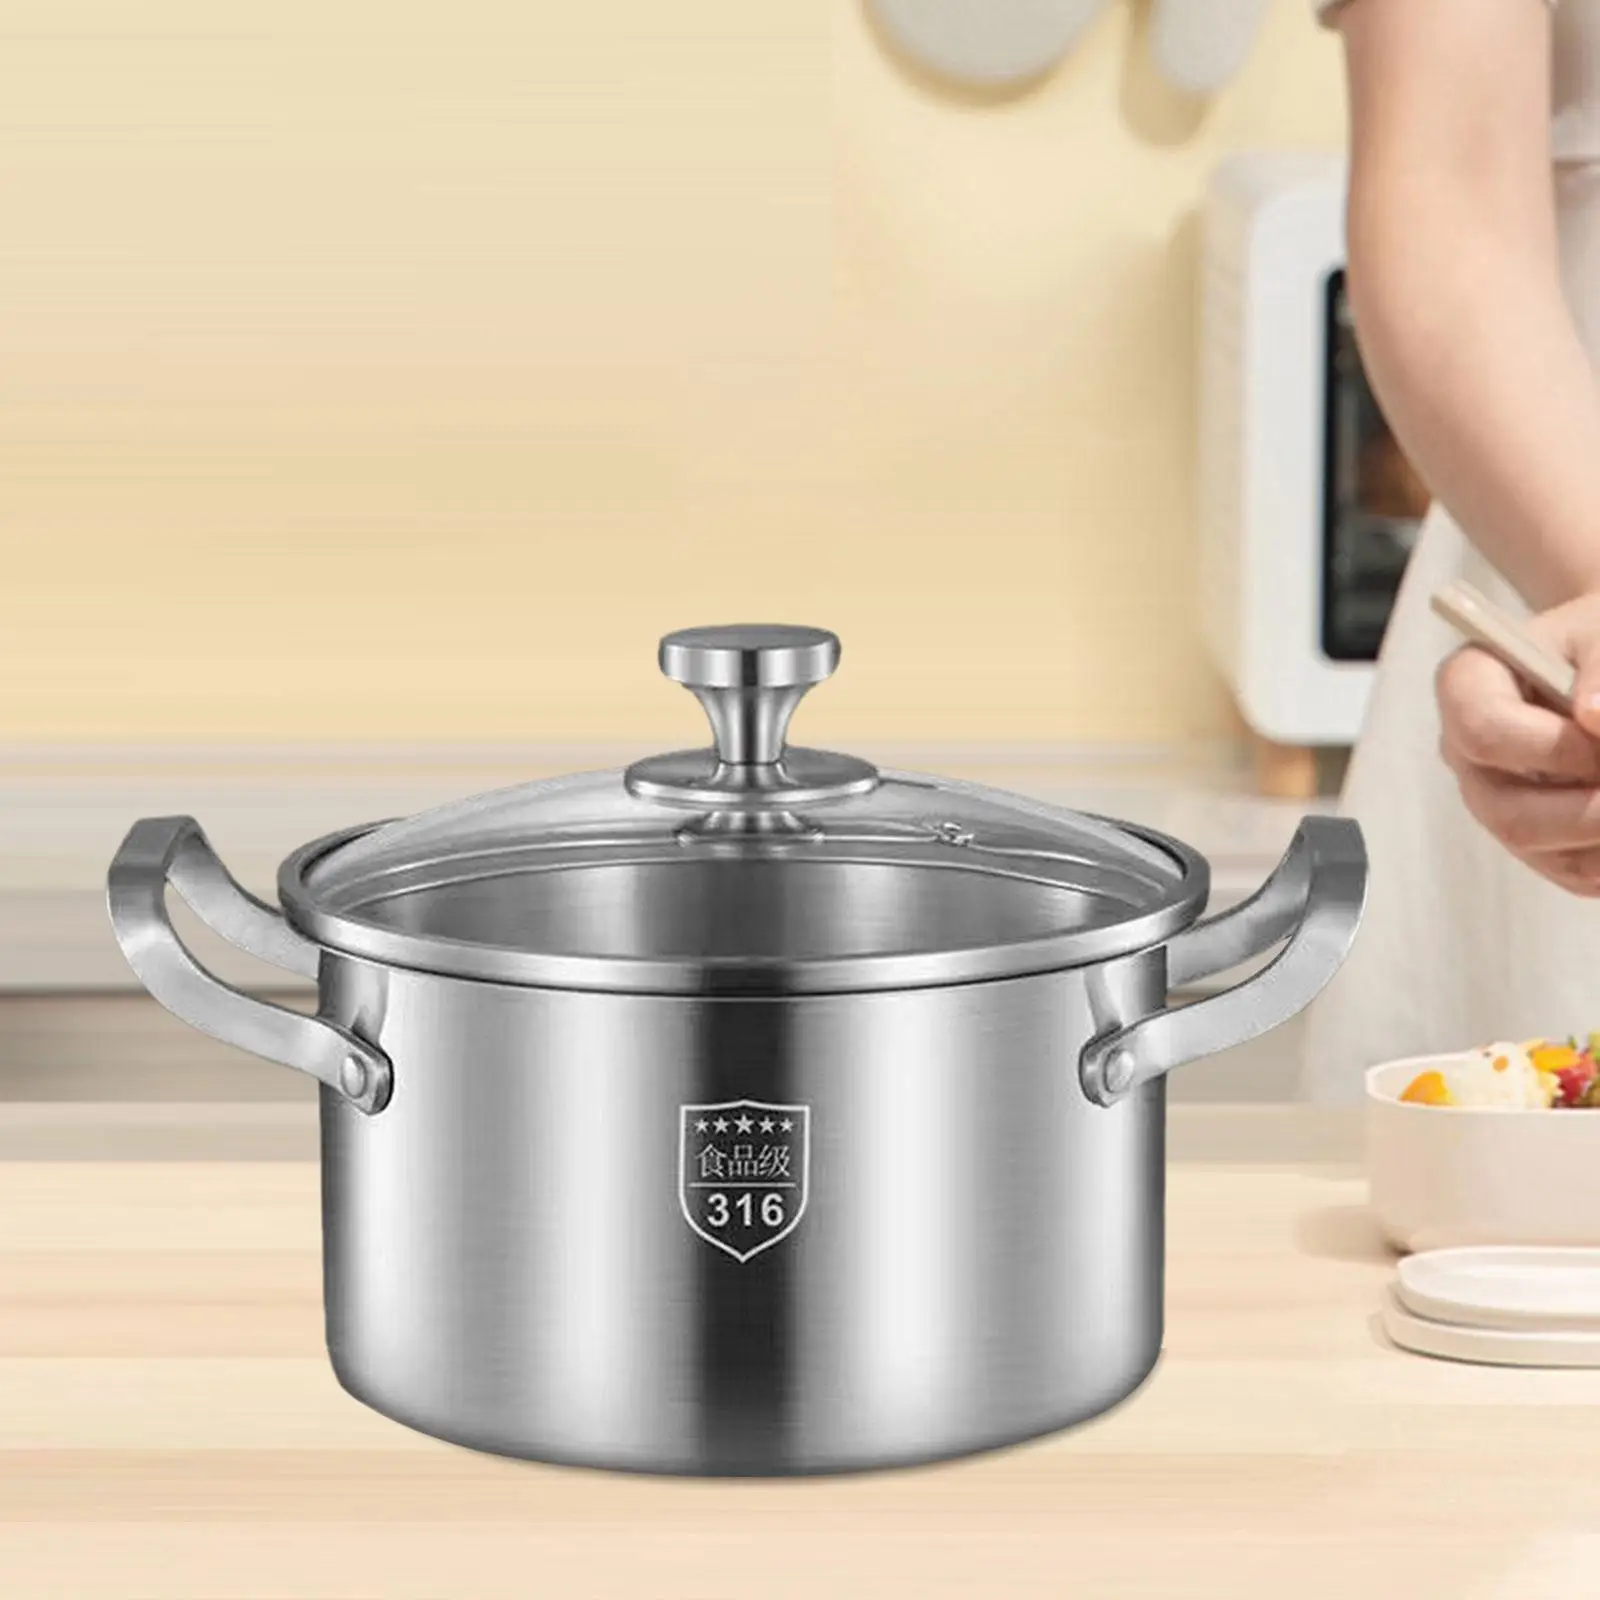 Soup Pot, Stockpot Stainless Steel Cooking Pot, for Home Bar Kitchen Restaurant